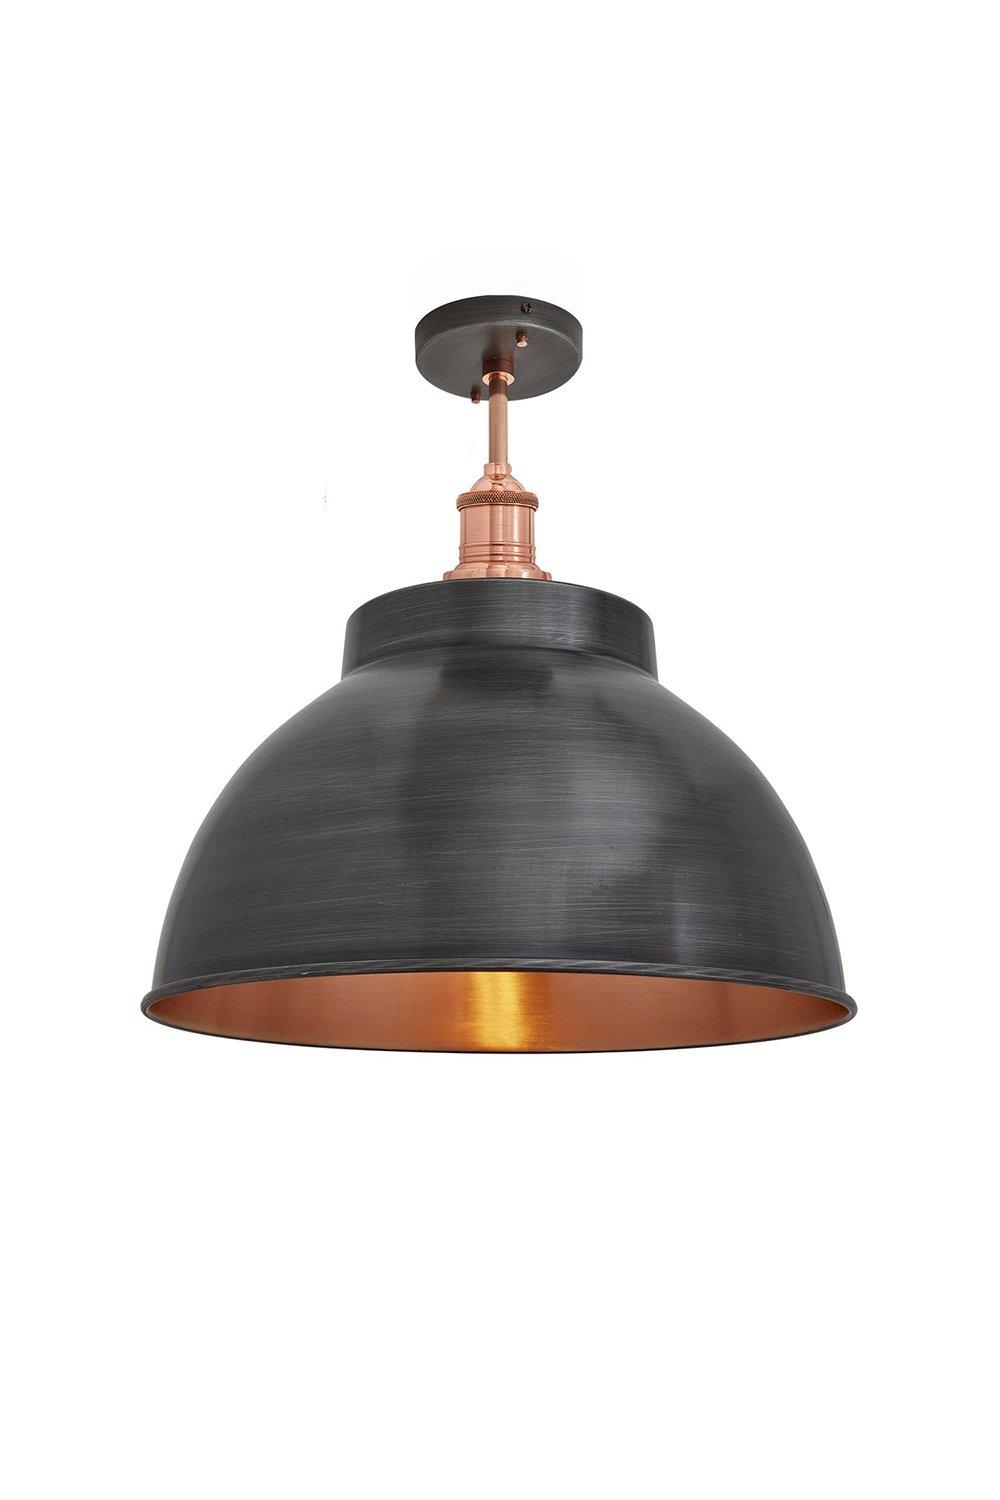 Brooklyn Dome Flush Mount, 13 Inch, Pewter & Copper, Copper Holder